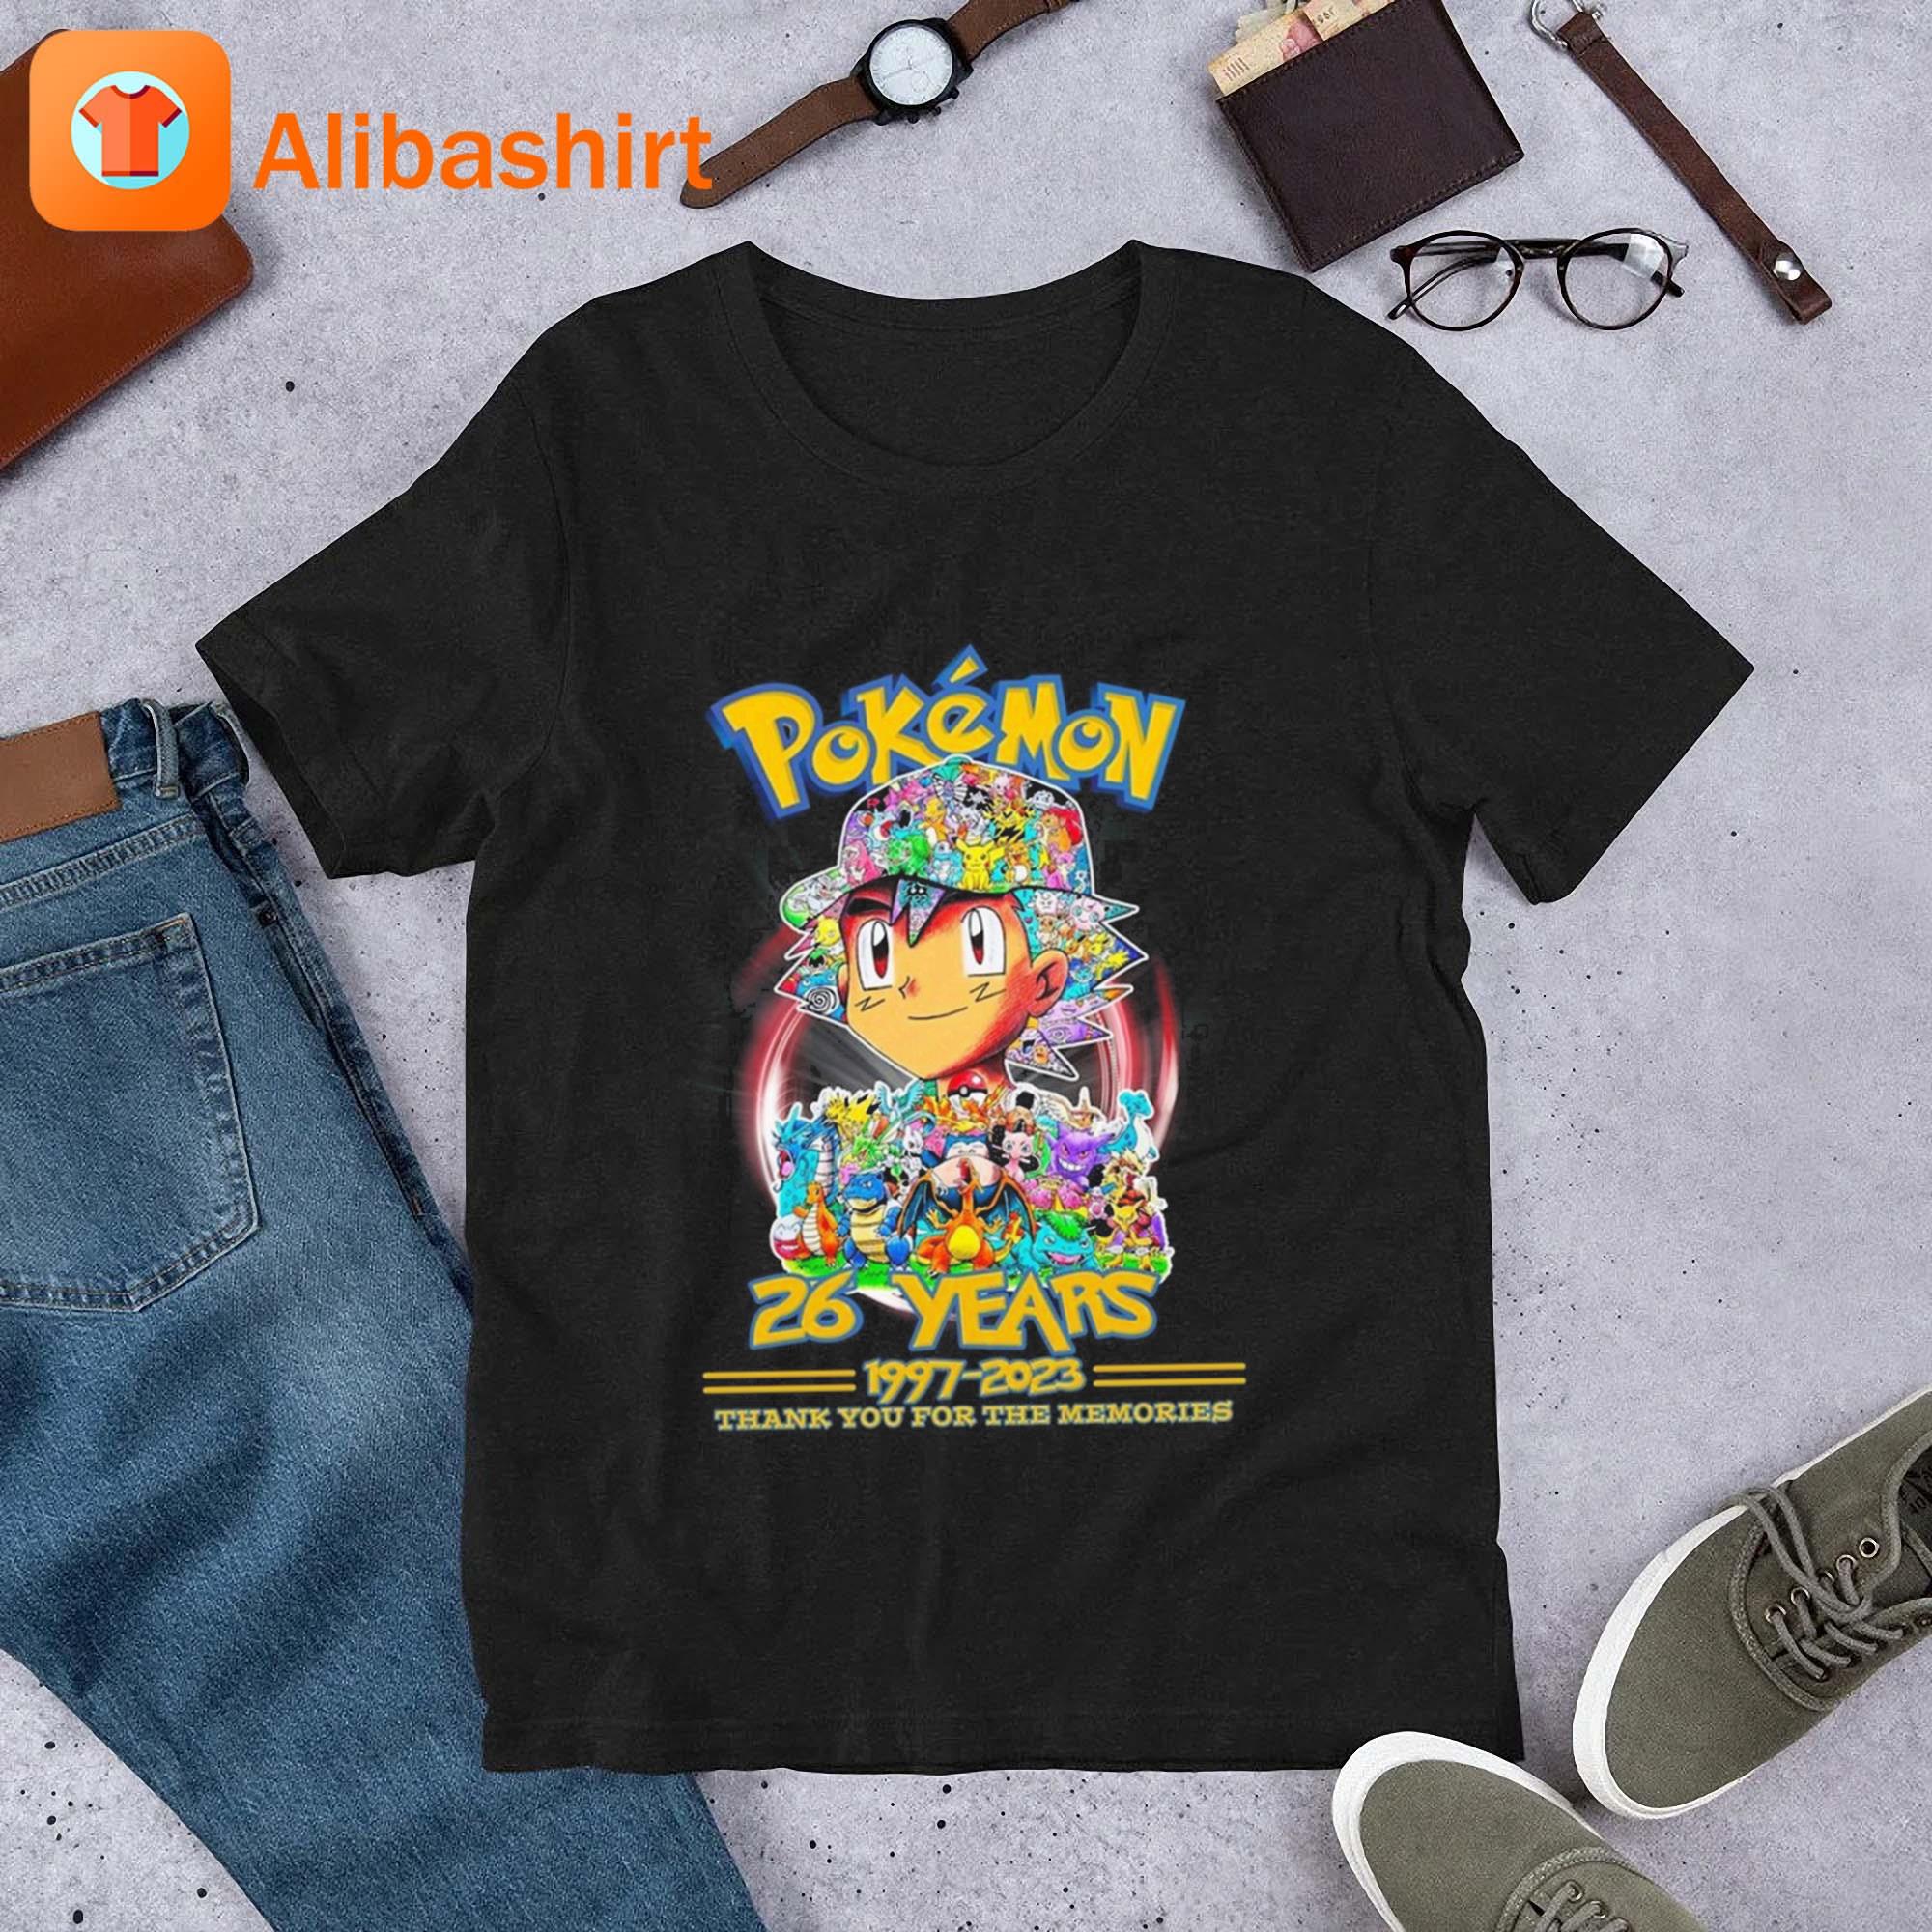 Pokemon 26 Years 1997 – 2023 Thank You For The Memories Shirt